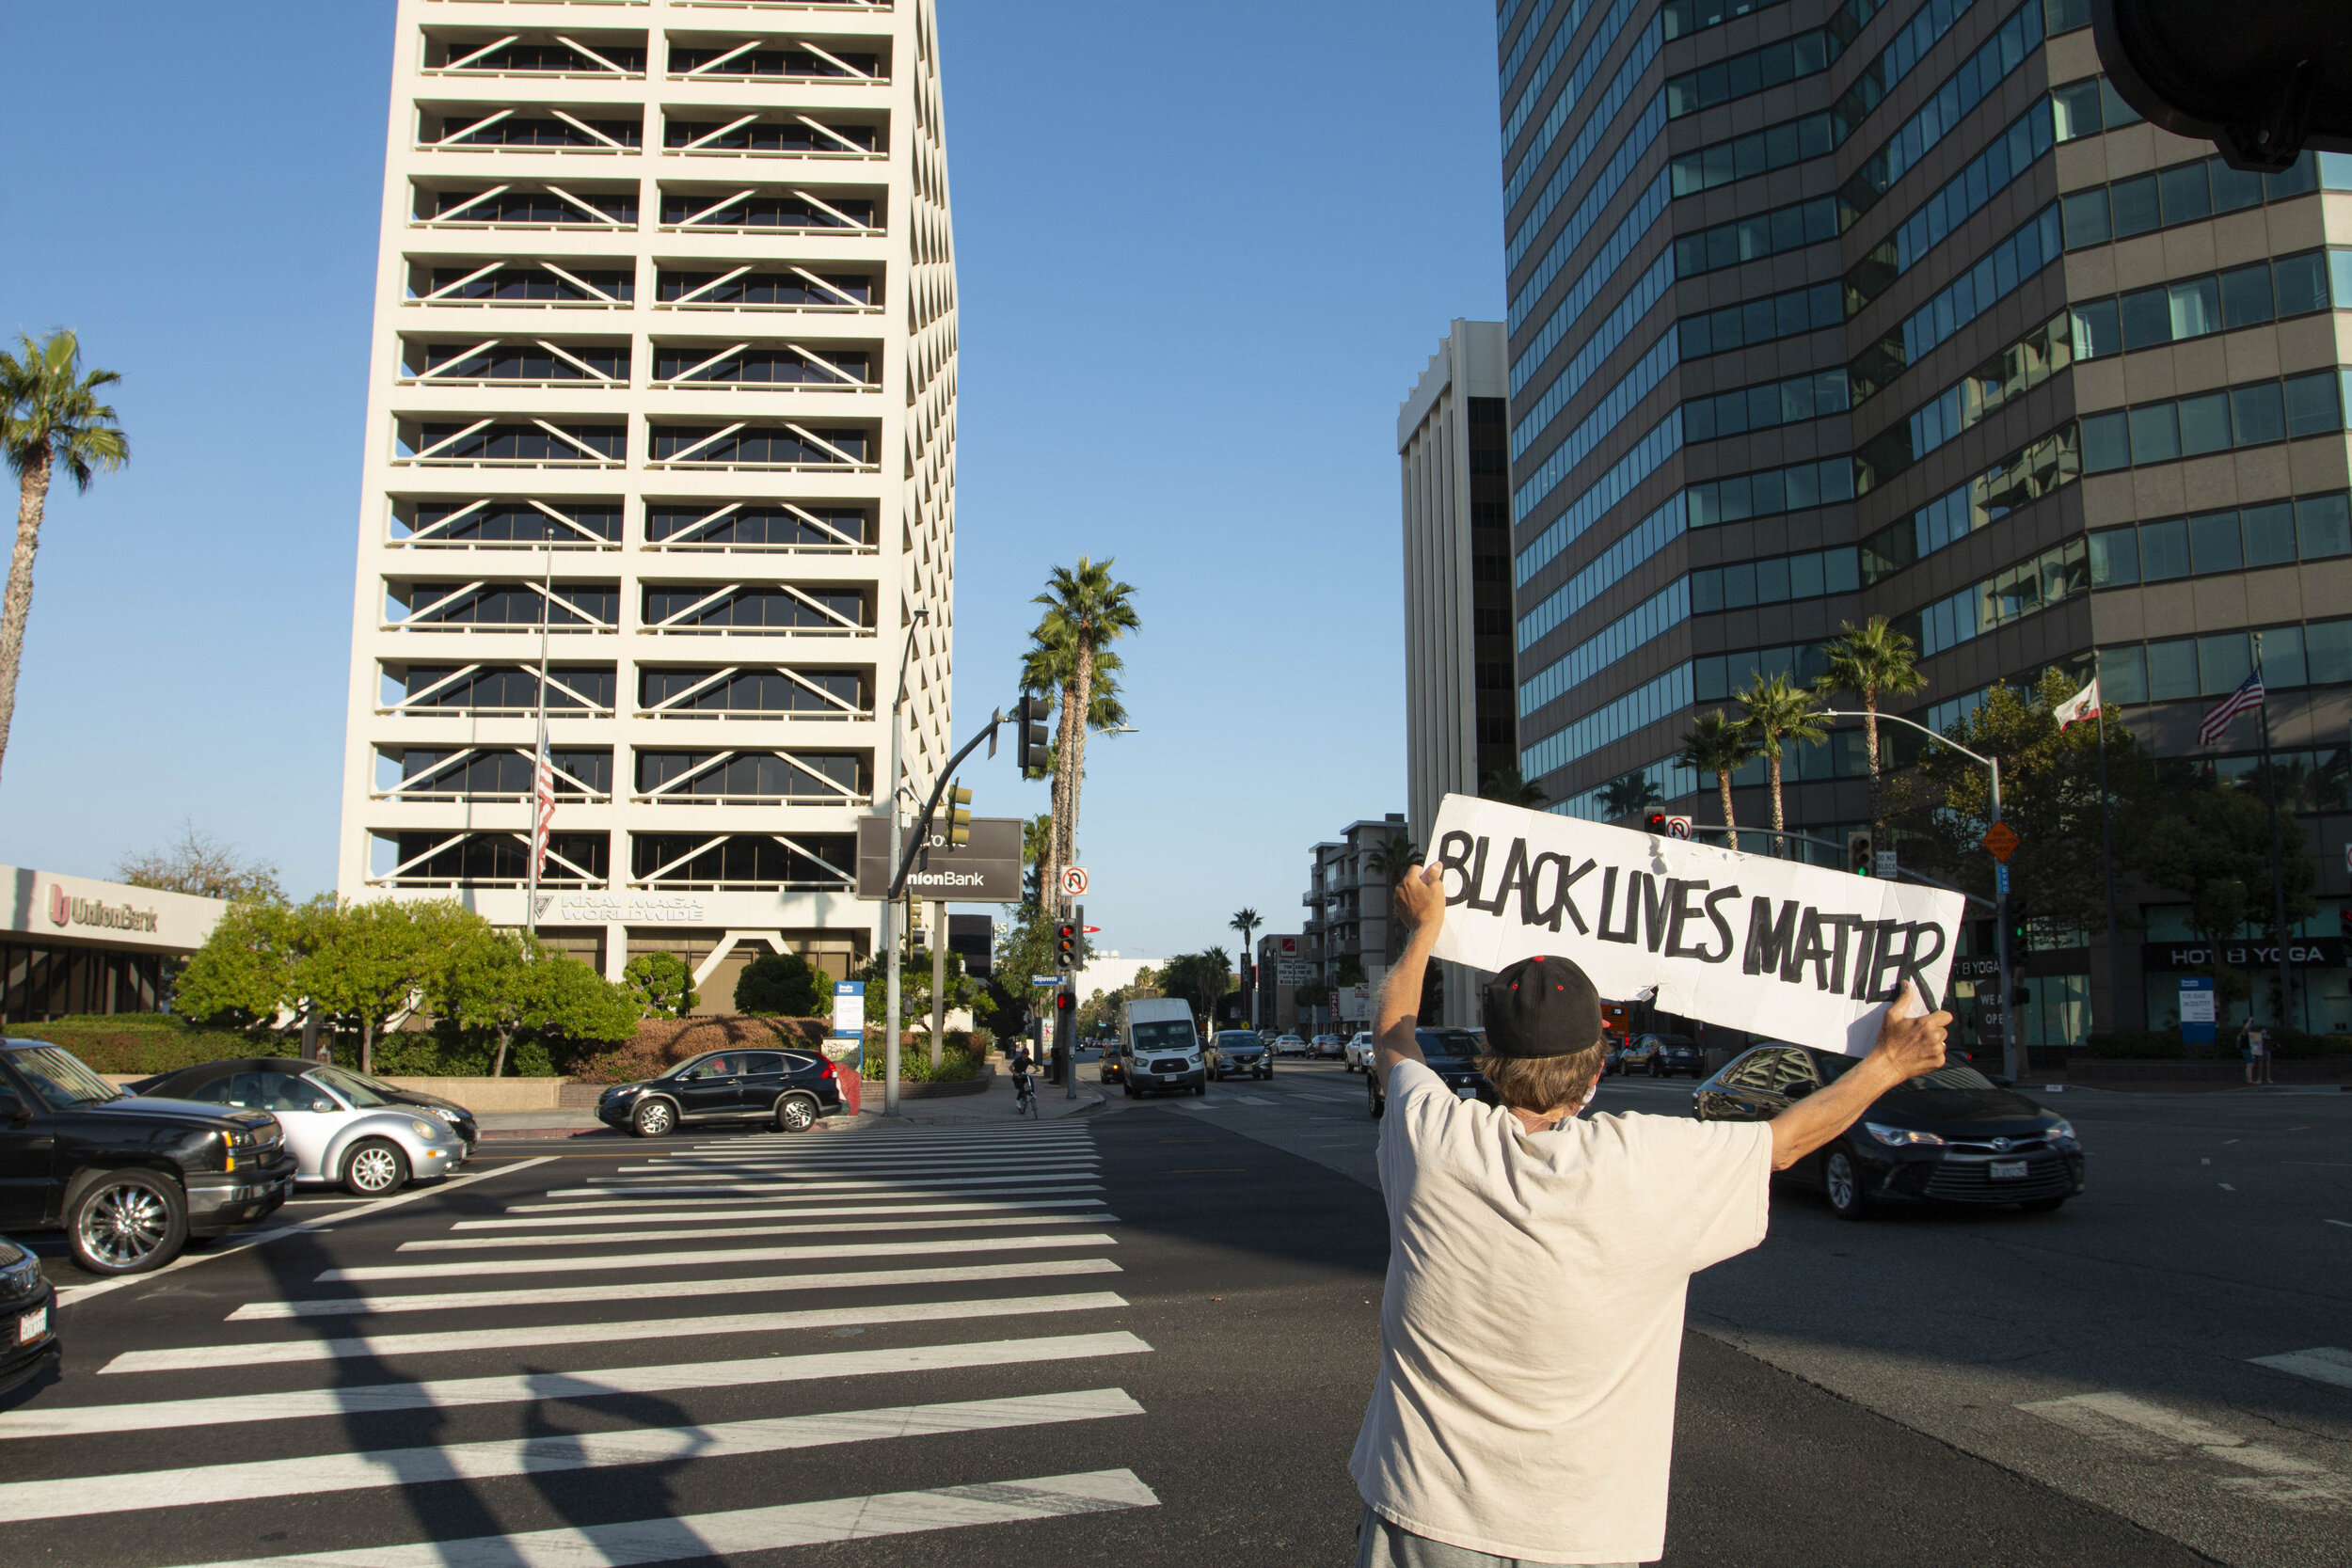   Mark Bender from Woodland Hills. protests at the Sherman Oaks Galleria. on Ventura Blvd and Sepulveda on Sept. 28, 2020. (Romeo Kuhn / The Corsair)  